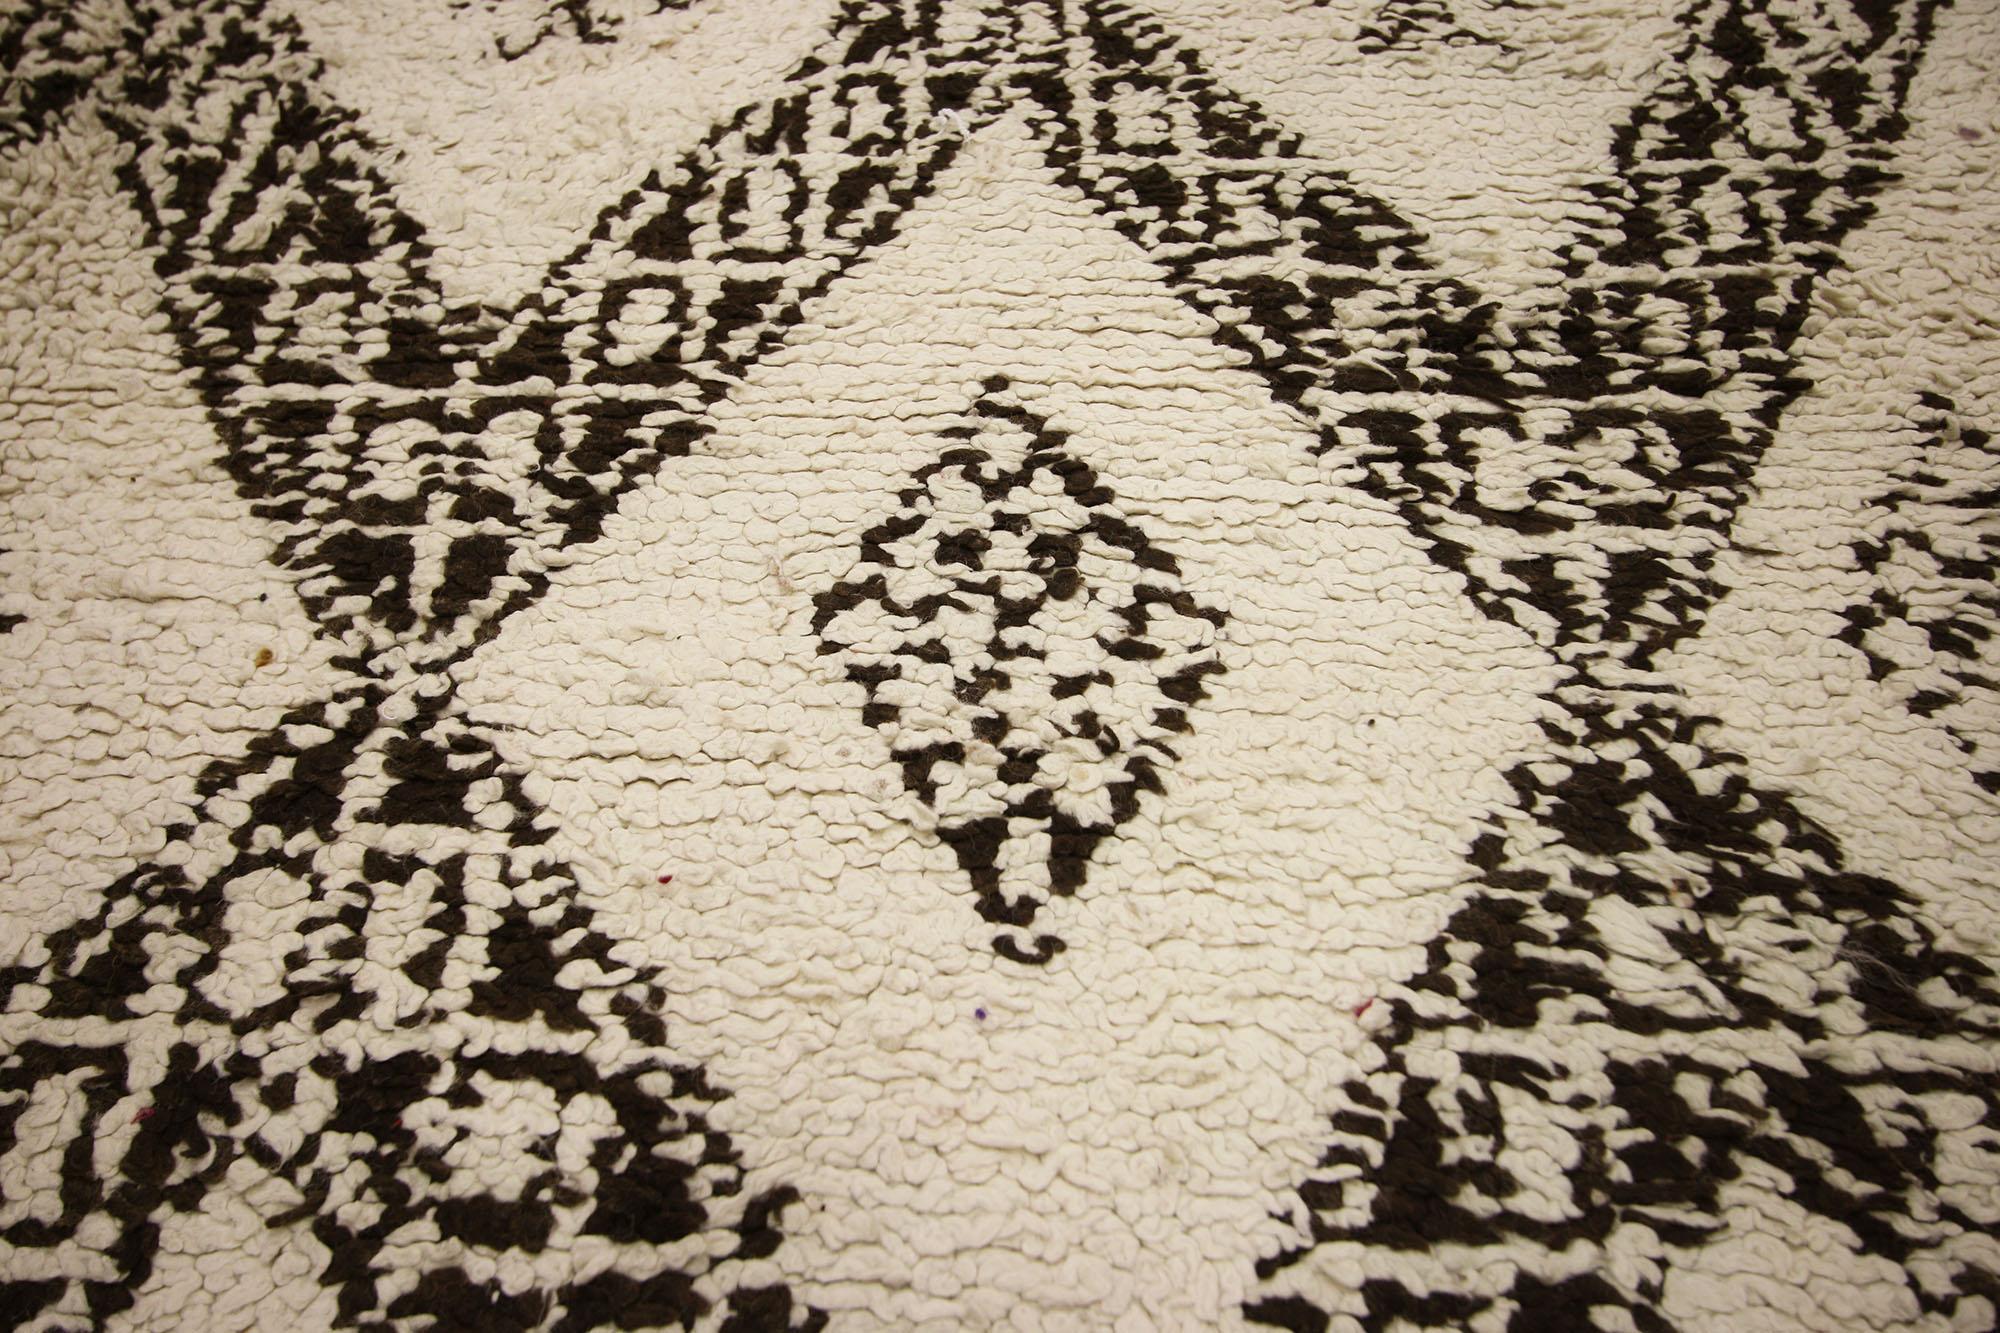 Hand-Knotted Vintage Beni Ourain Moroccan Rug, Midcentury Modern Meets Cozy Boho For Sale